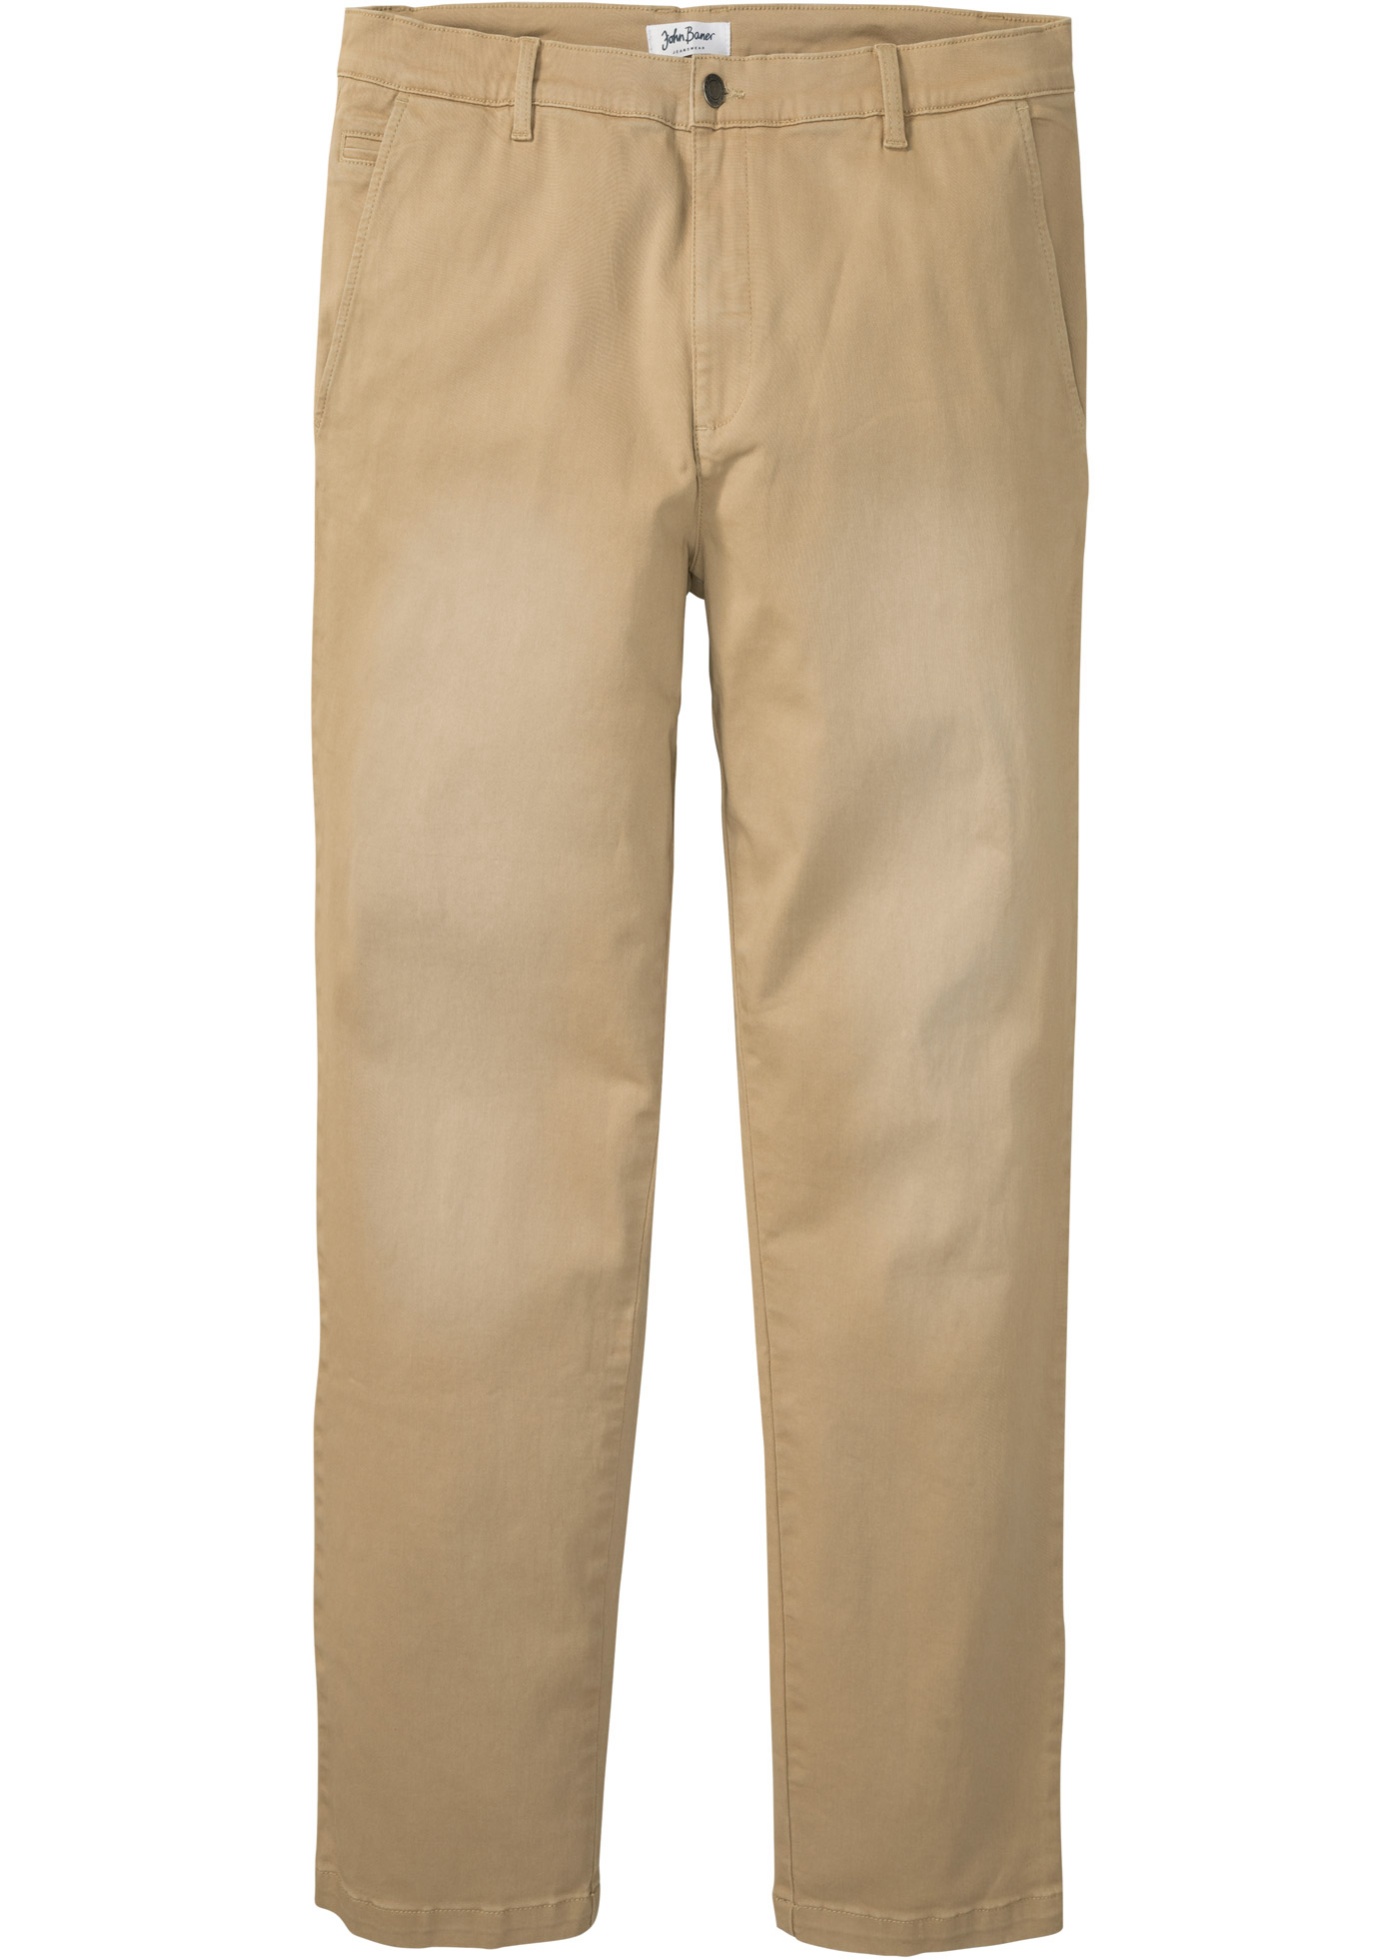 Classic Fit Coloured džínsy chino, Tapered